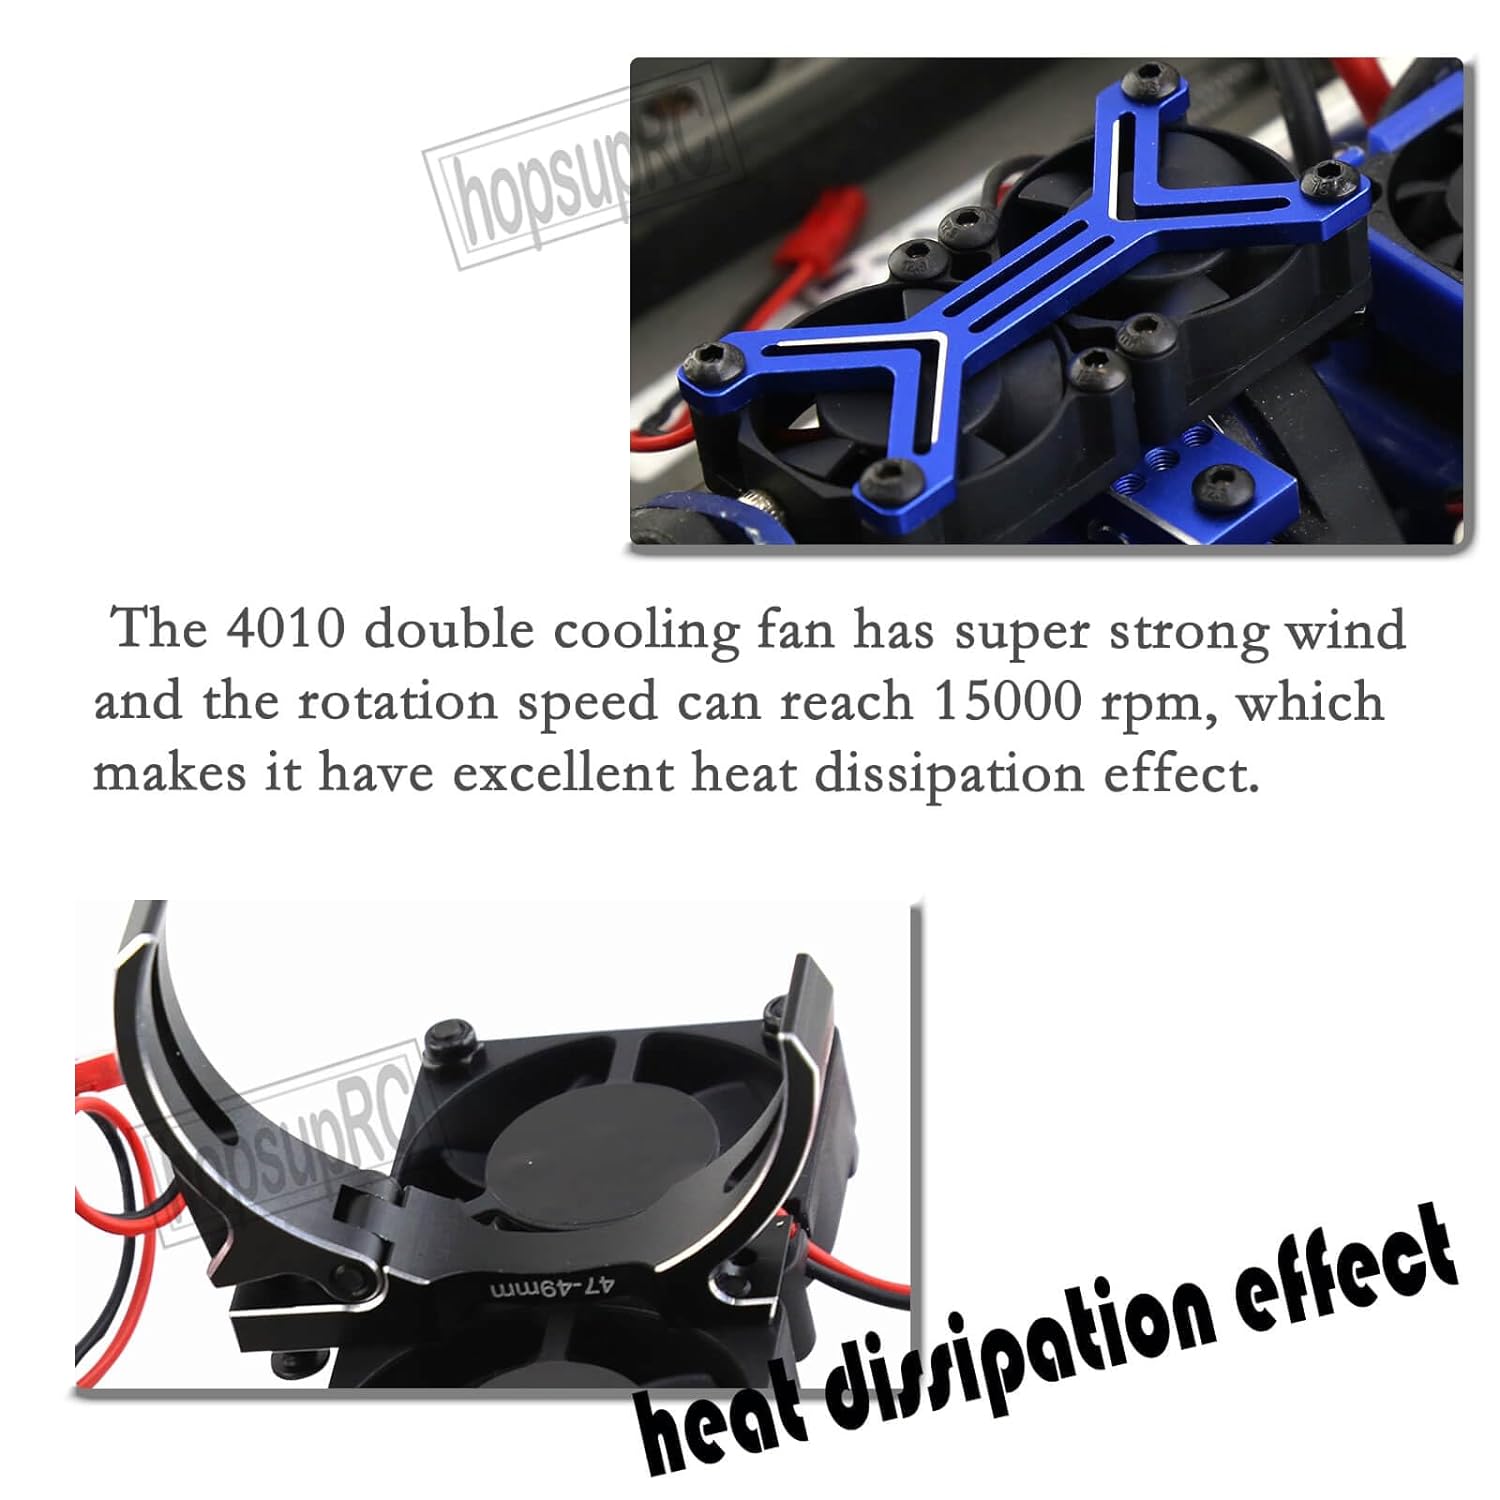 ProtonRC Motor Cooling Fan with 47-49mm Adjustable Mount for 1/8 1/5 4985 1717 Motor,Aluminum 4010 High Speed Cooling Dual Fans 15000 RPM ,Black